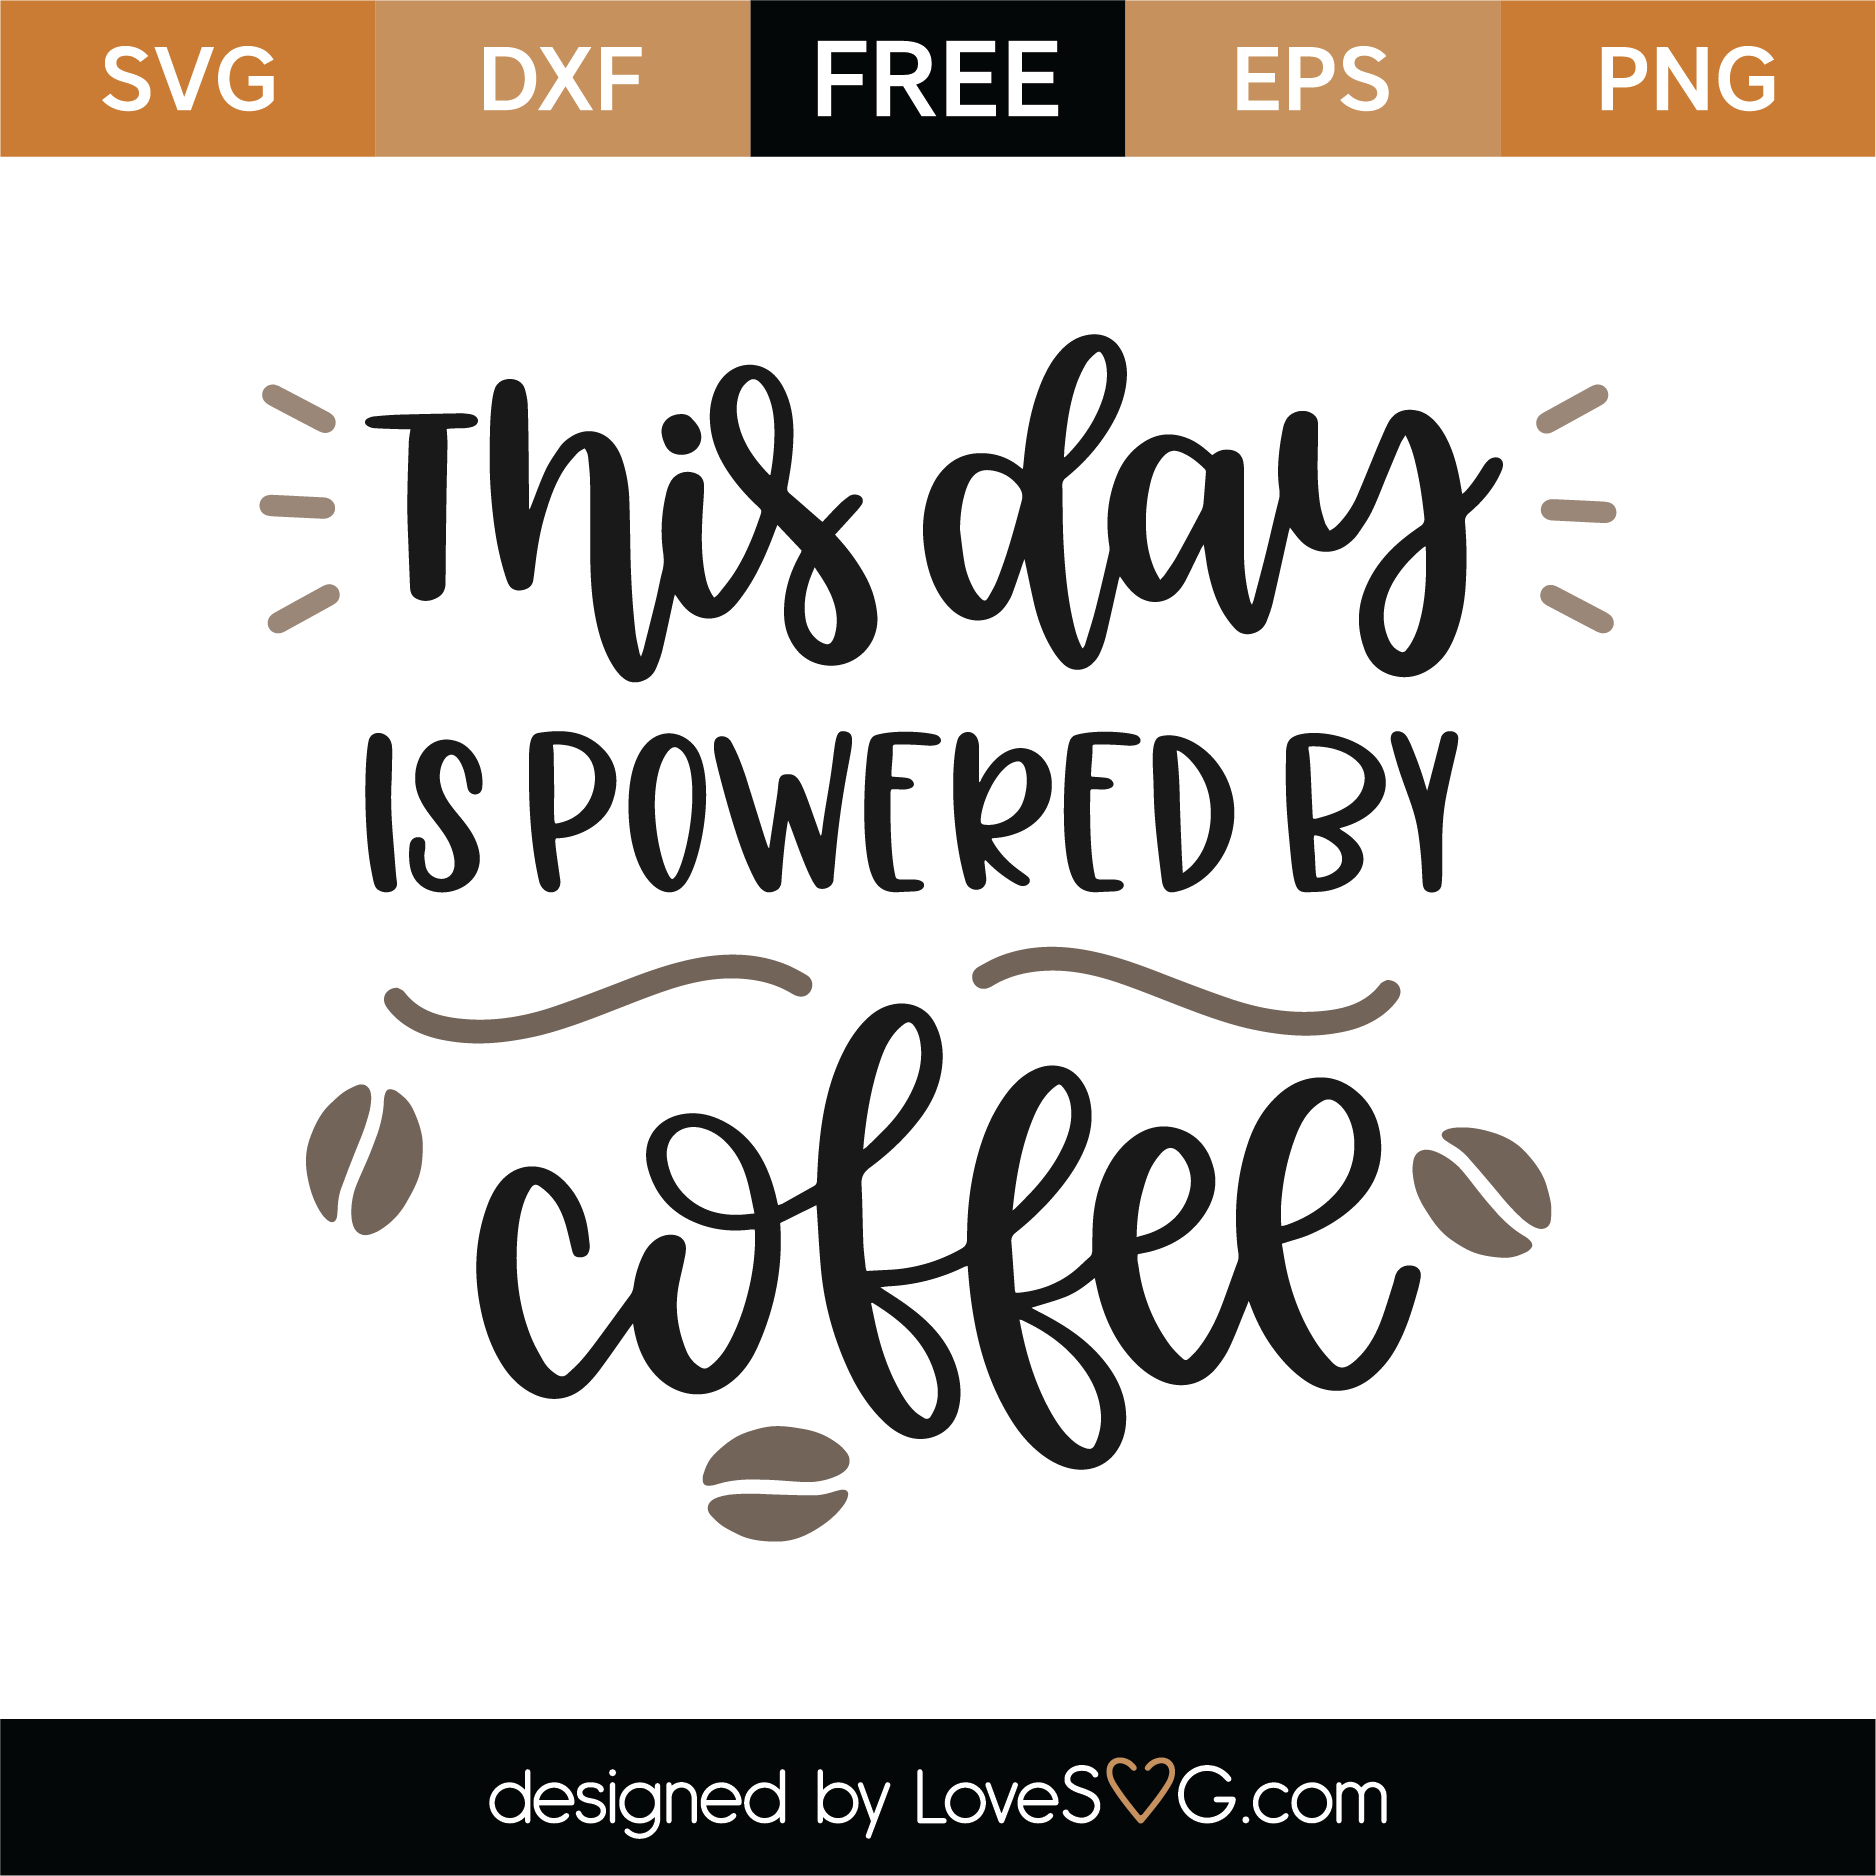 Download Free This Day Is Powered By Coffee SVG Cut File | Lovesvg.com